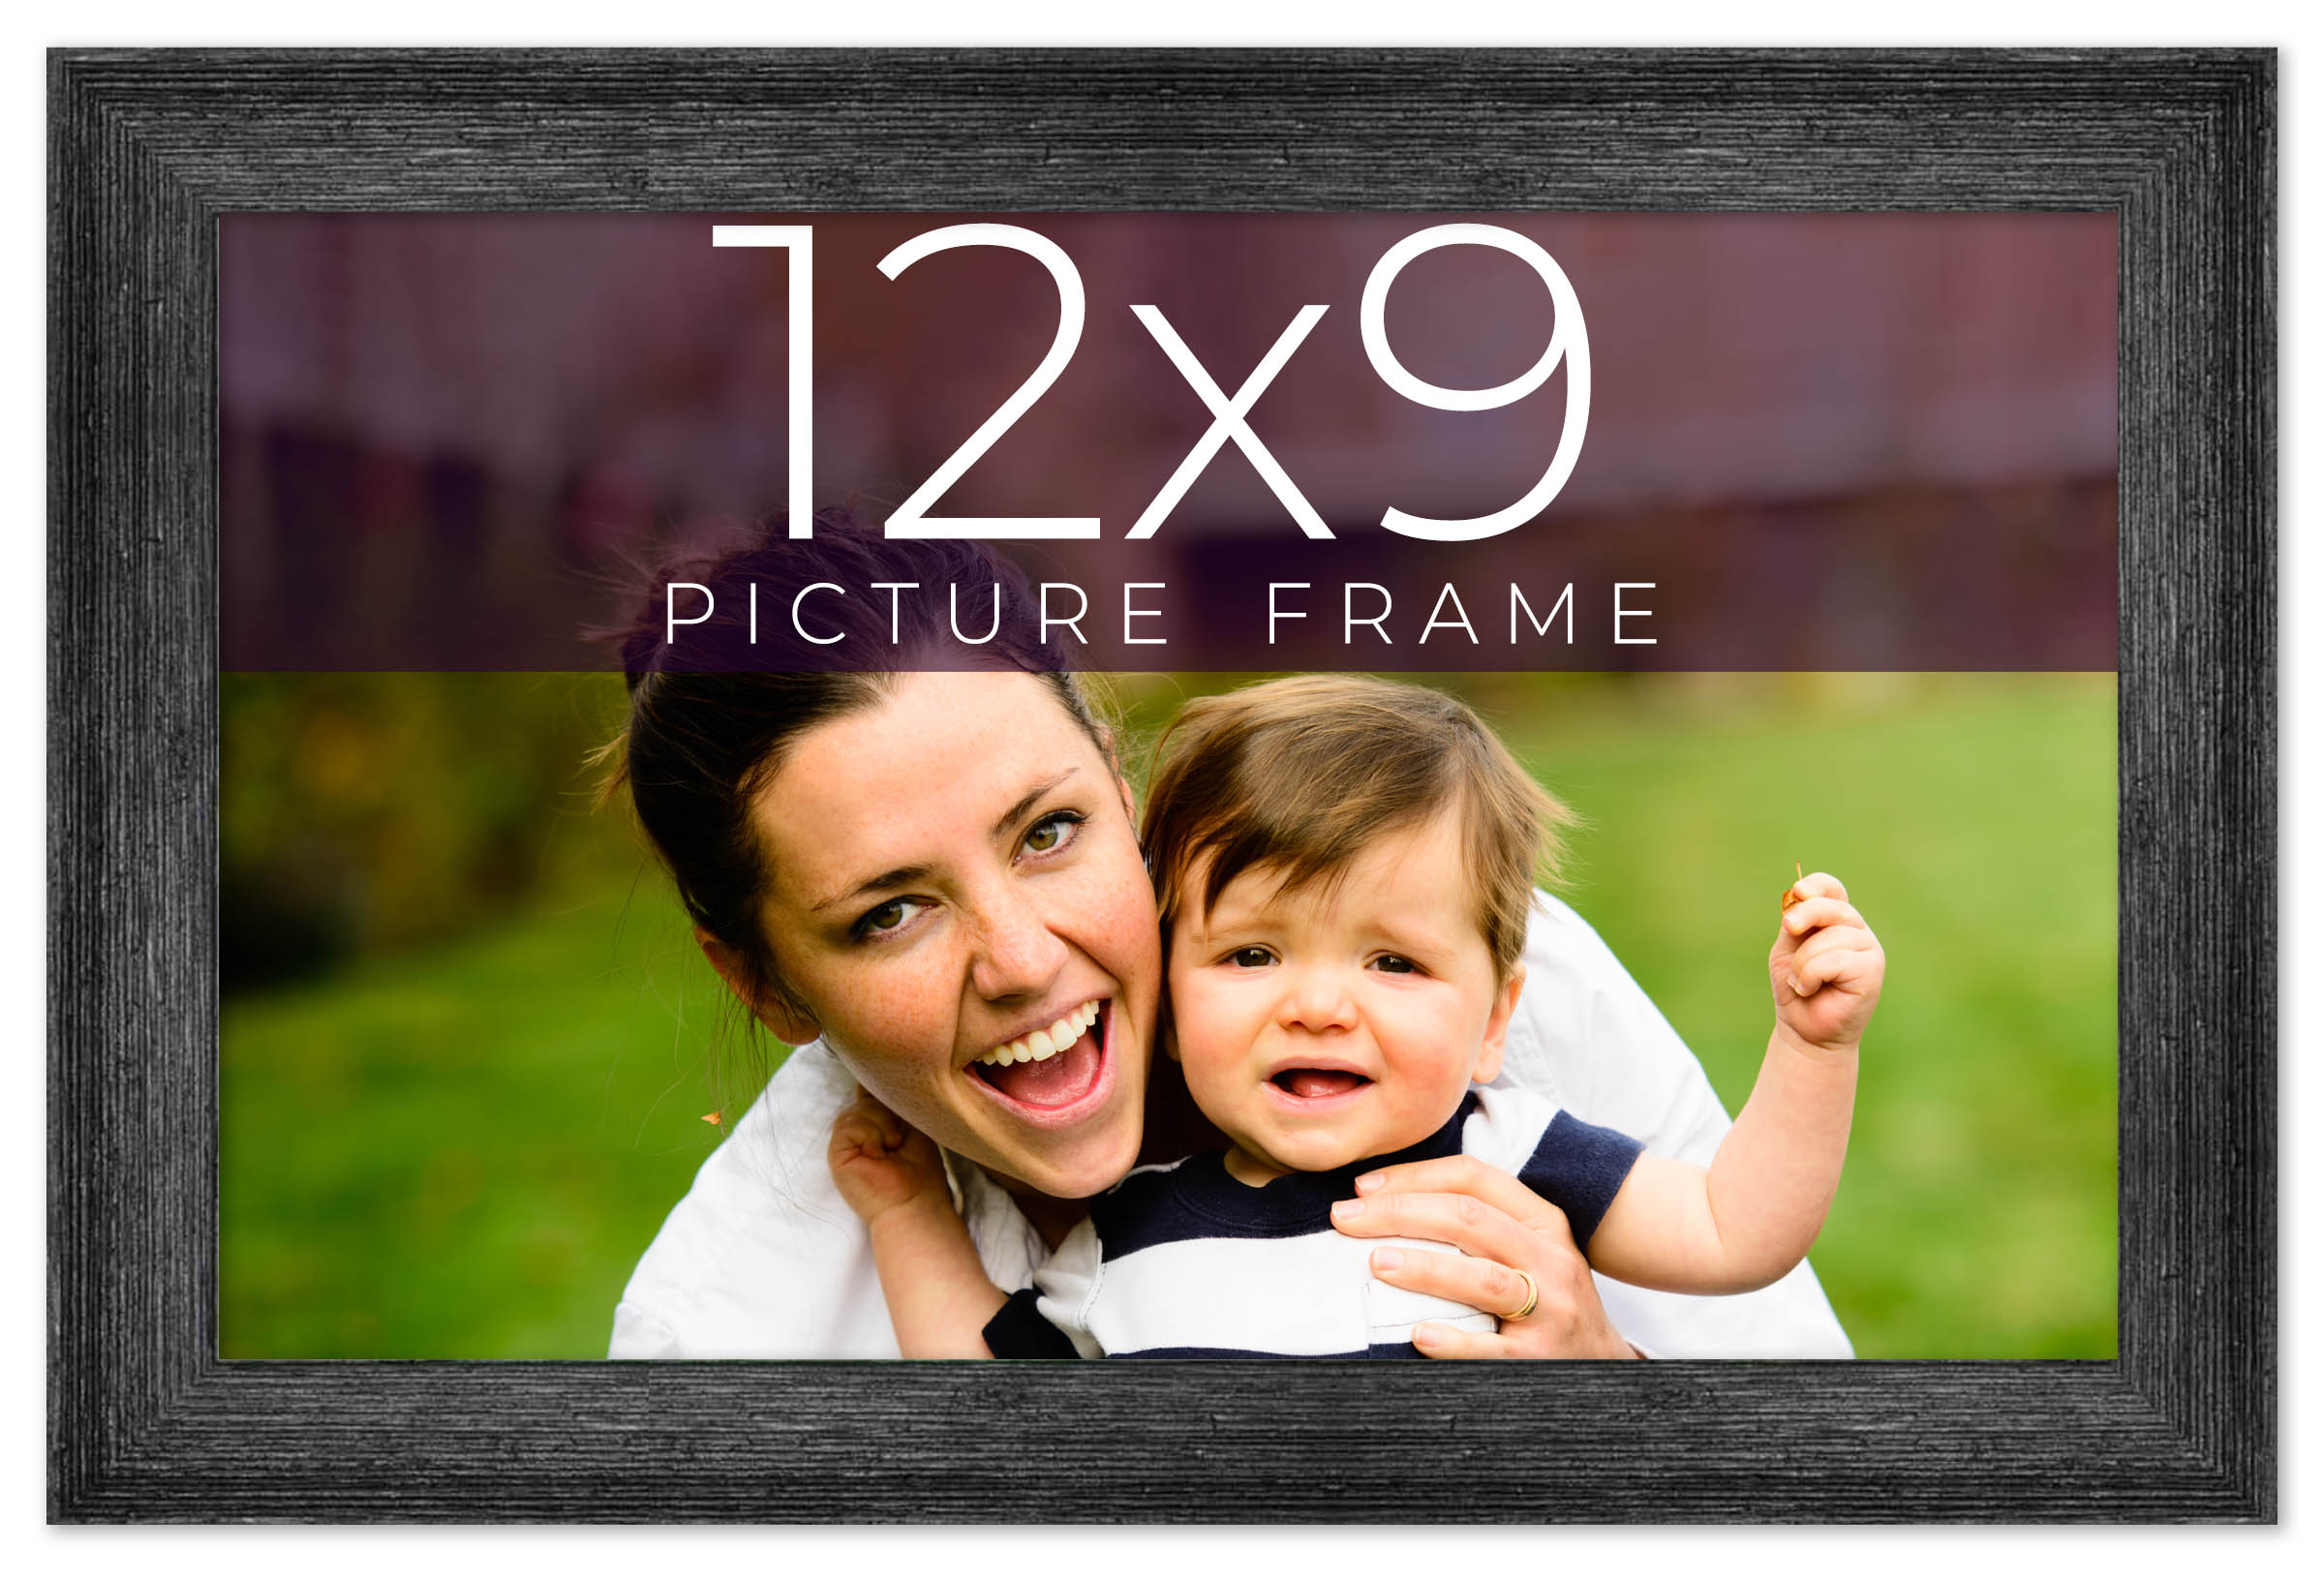 CustomPictureFrames.com 12x9 Frame Black Real Wood Picture Frame Width 1.5 inches | Interior Frame Depth 0.5 inches | Barn Black Distressed Photo Frame